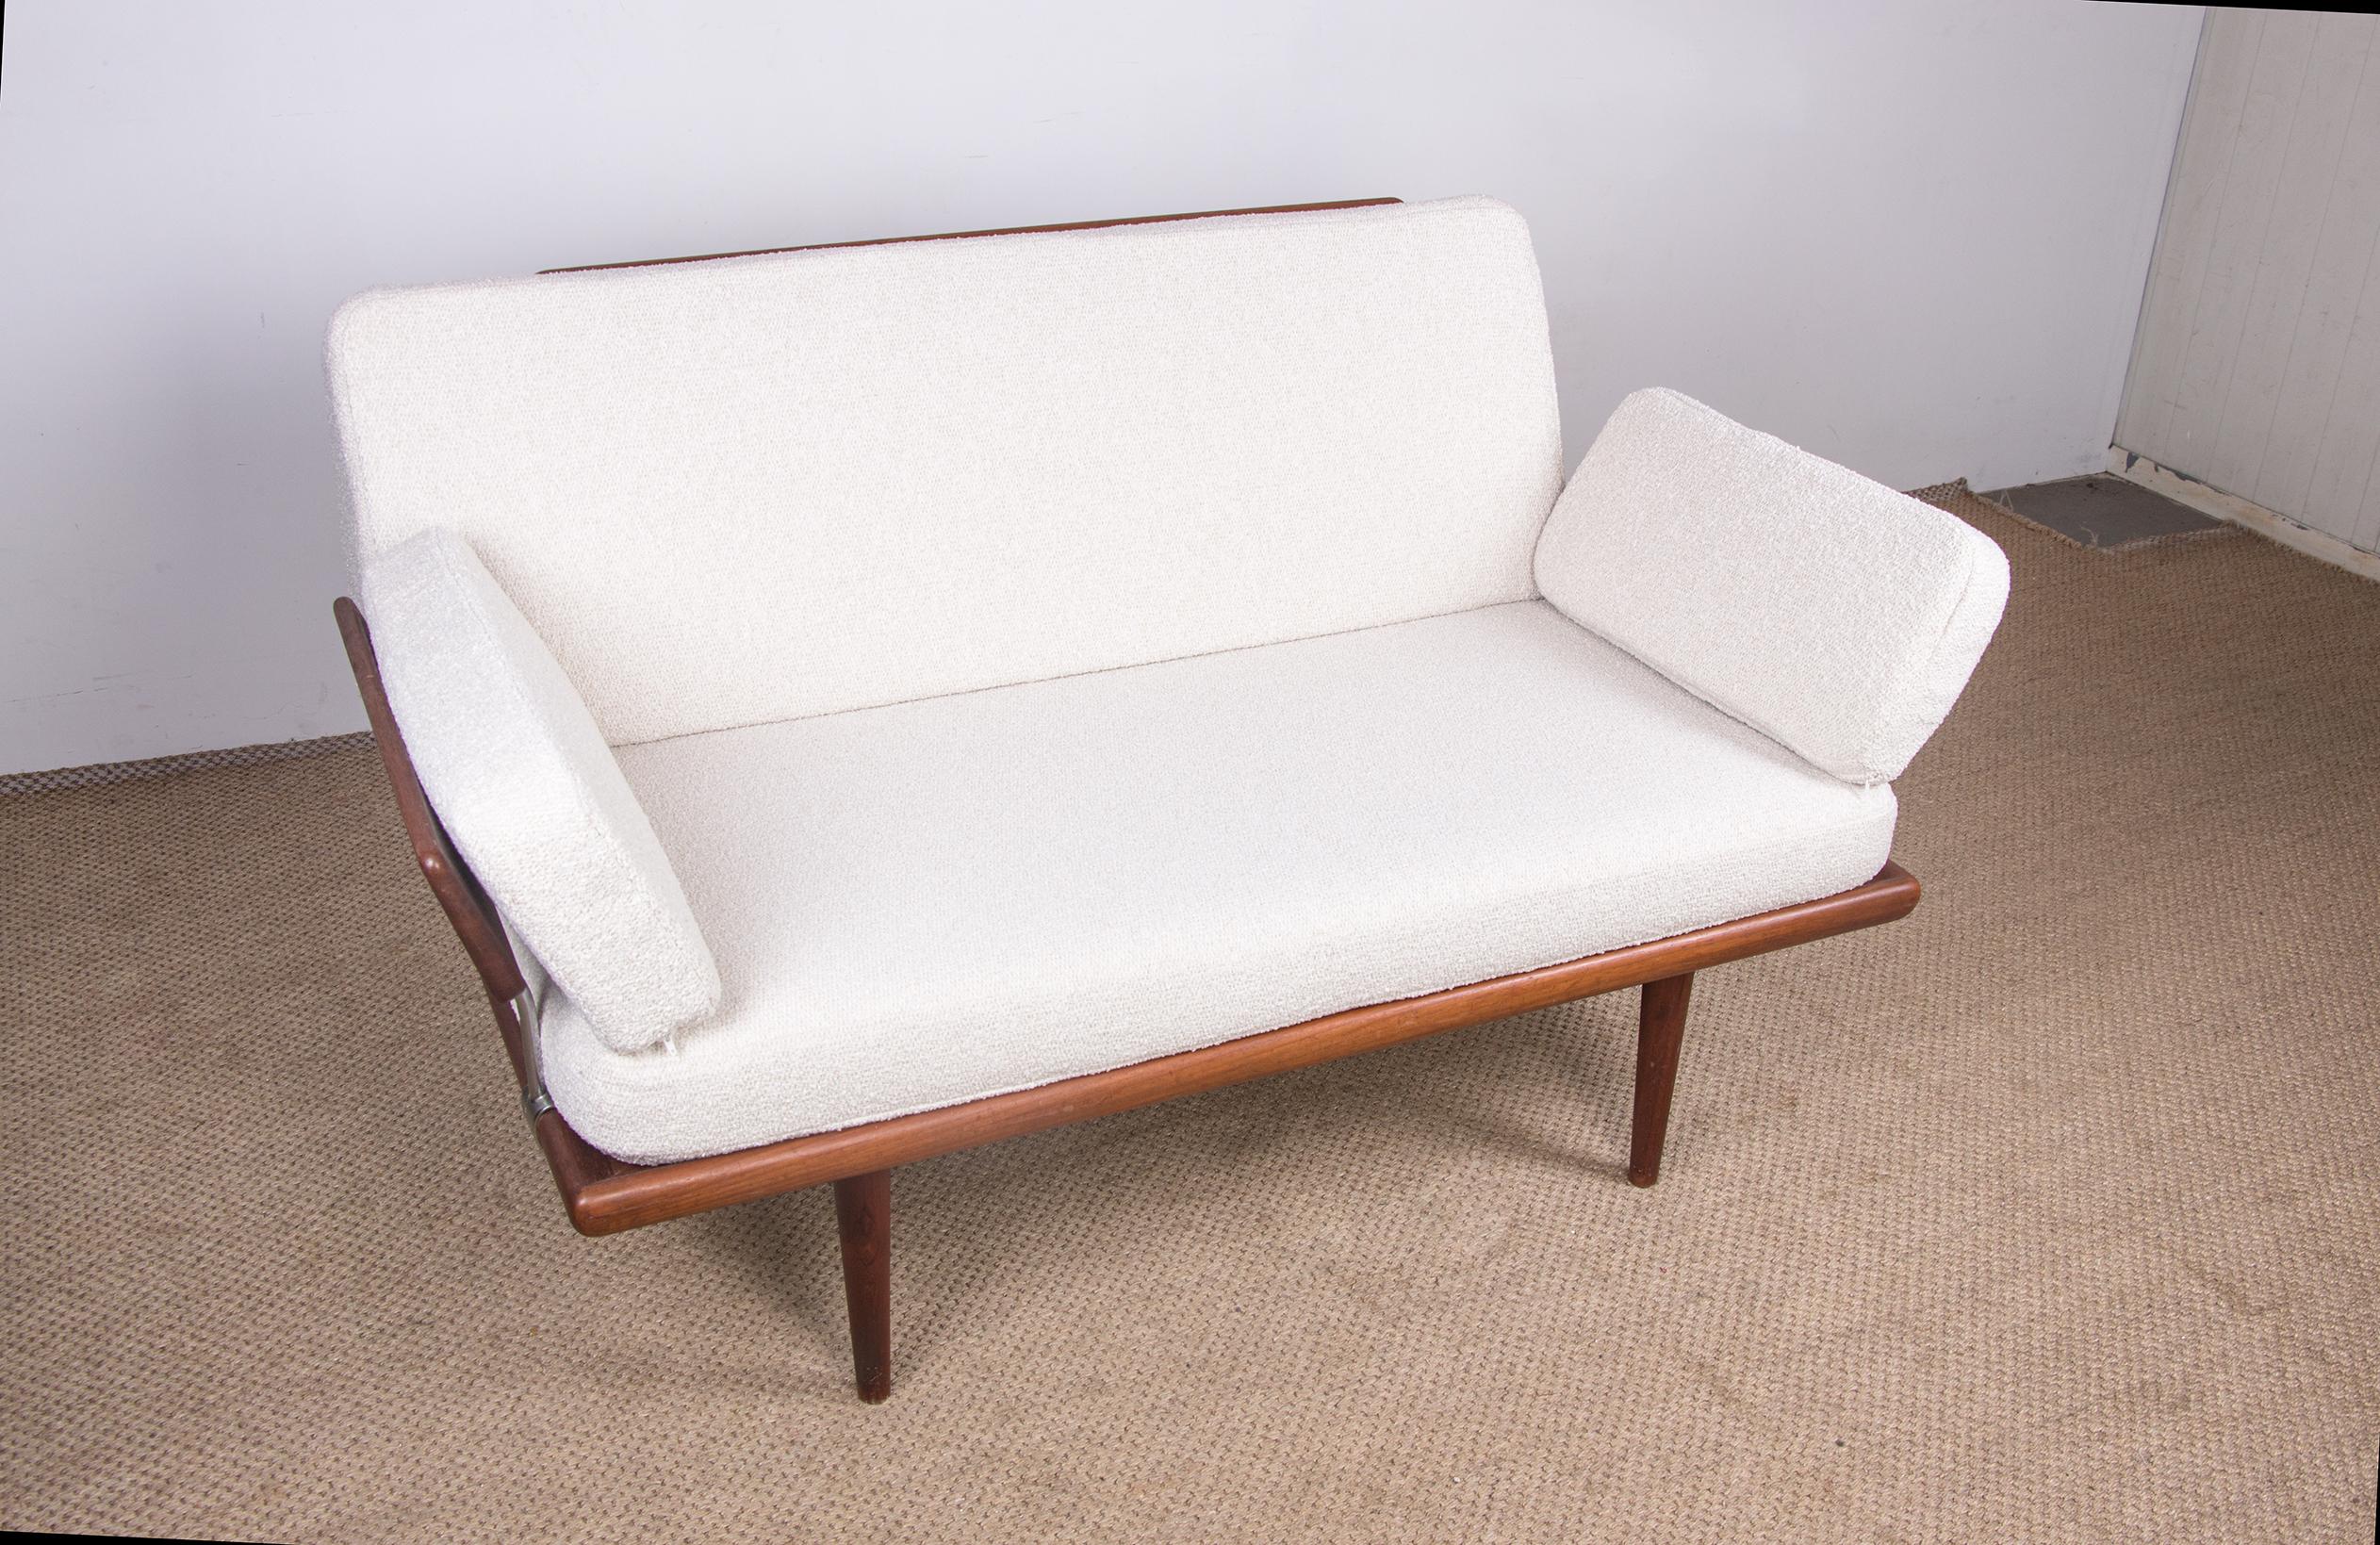 Superb Scandinavian sofa, 2 armrests with their cushions, all the fabrics, seat, backrest and cushion have their original structure and have been reupholstered in cream terry fabric. Manufacture of very good quality, a lot of charm and great comfort.